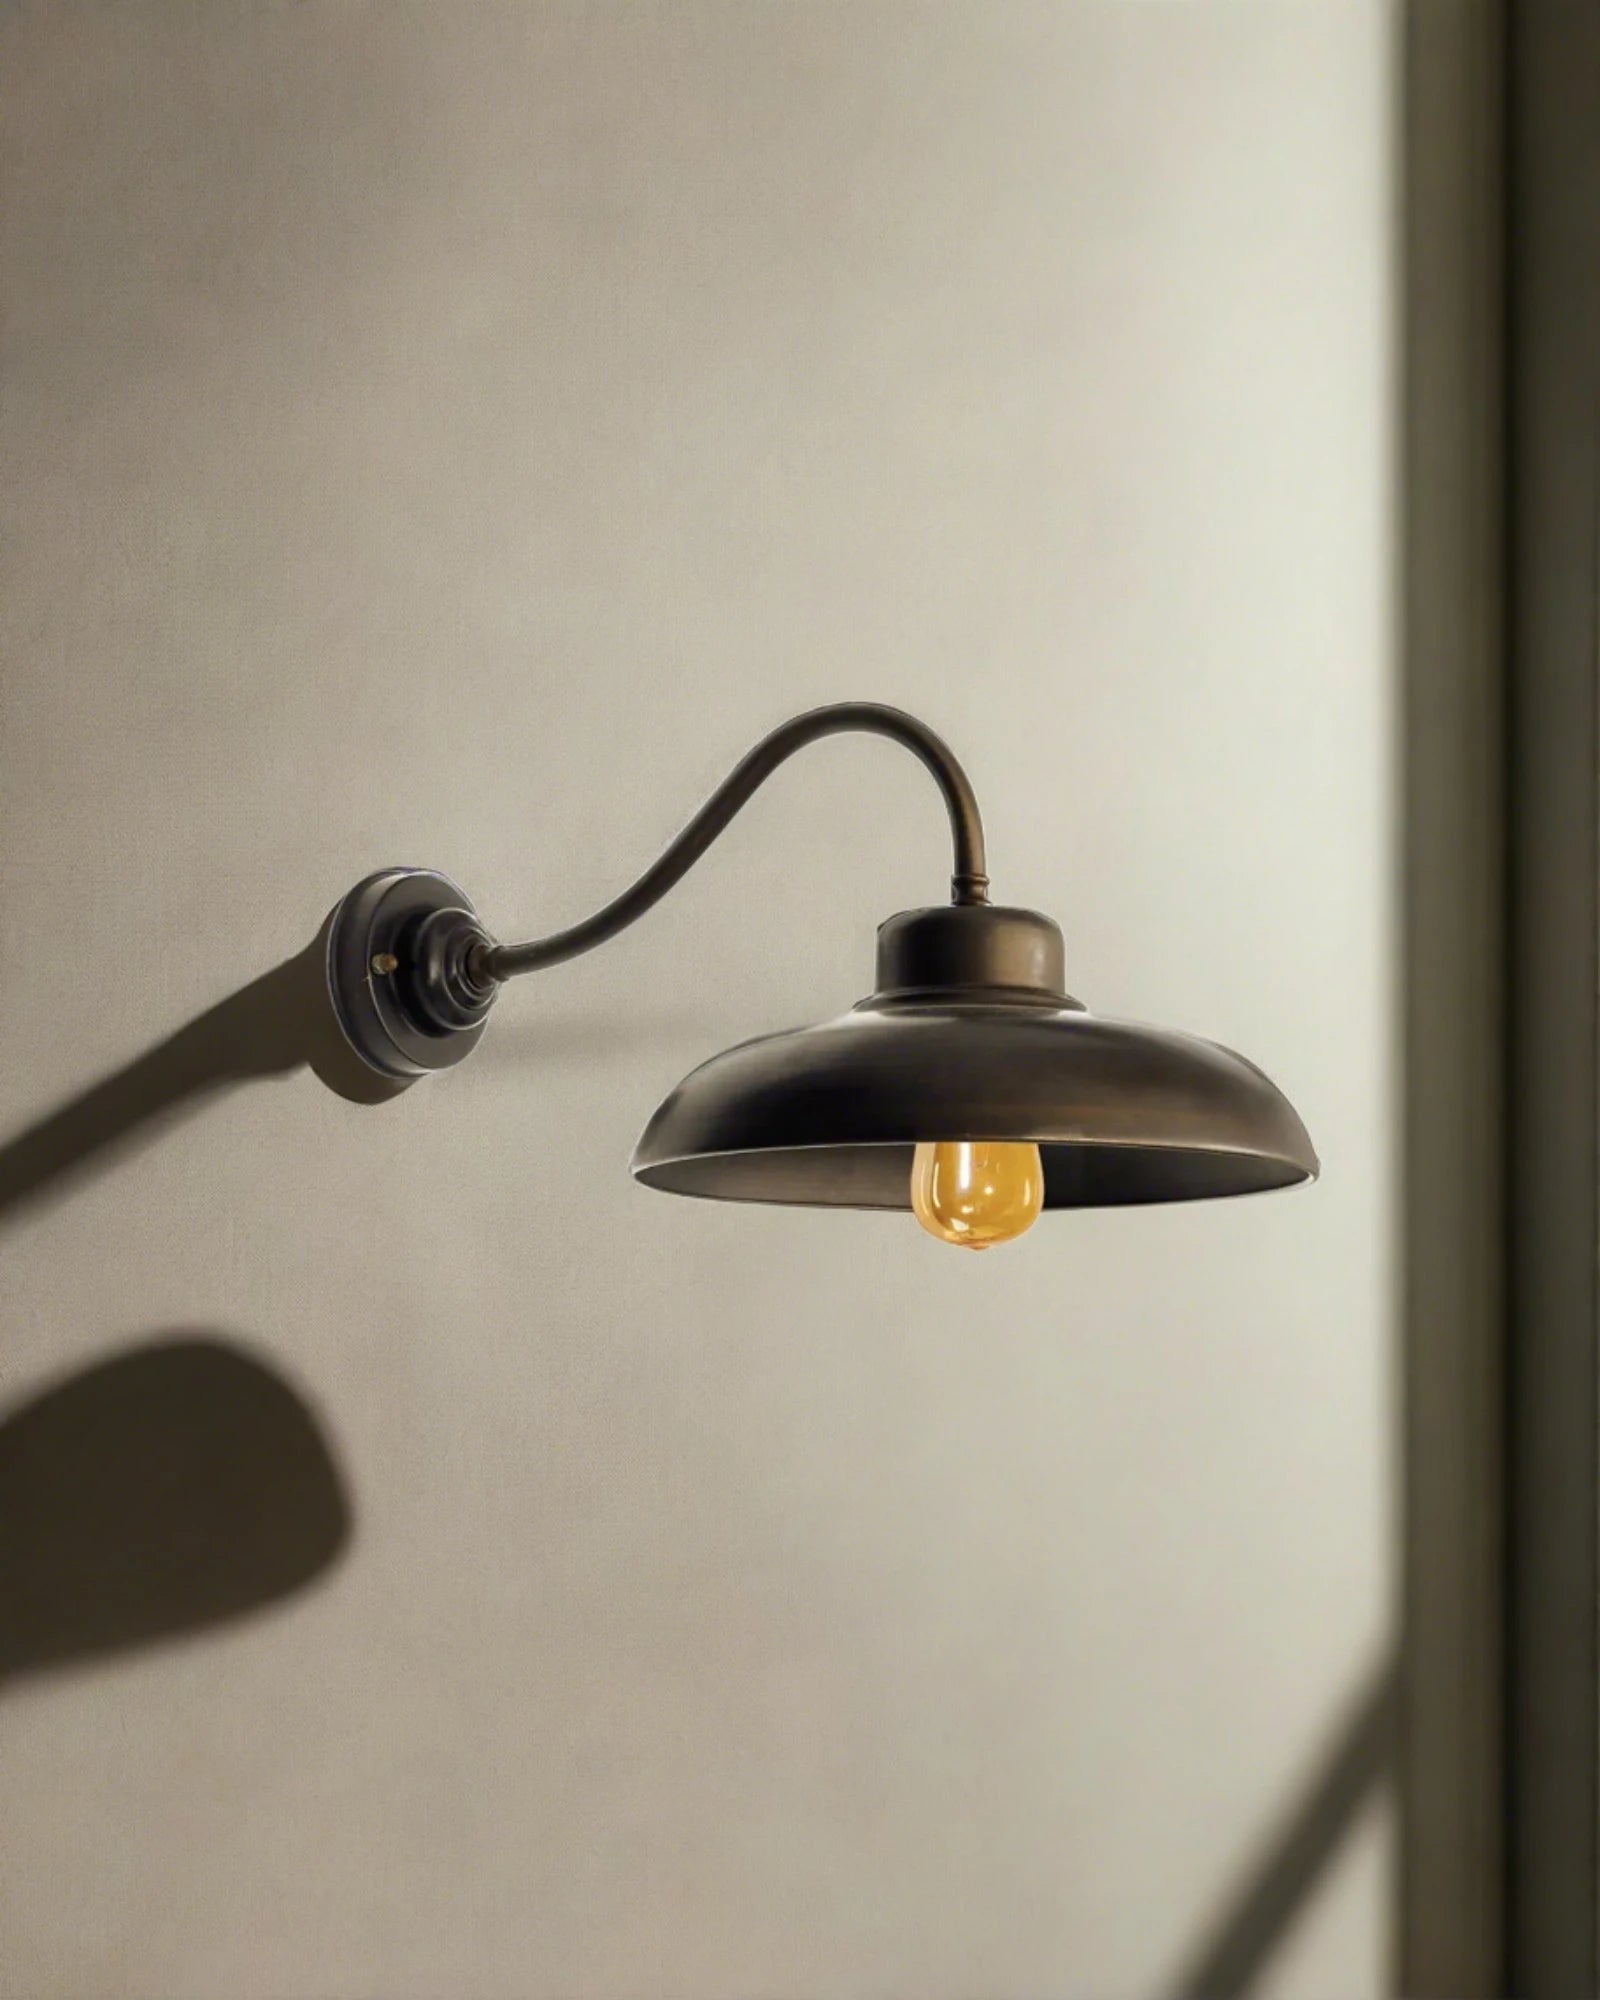 Samoa Curve Wall Light by Moretti Luce at Nook Collecitons